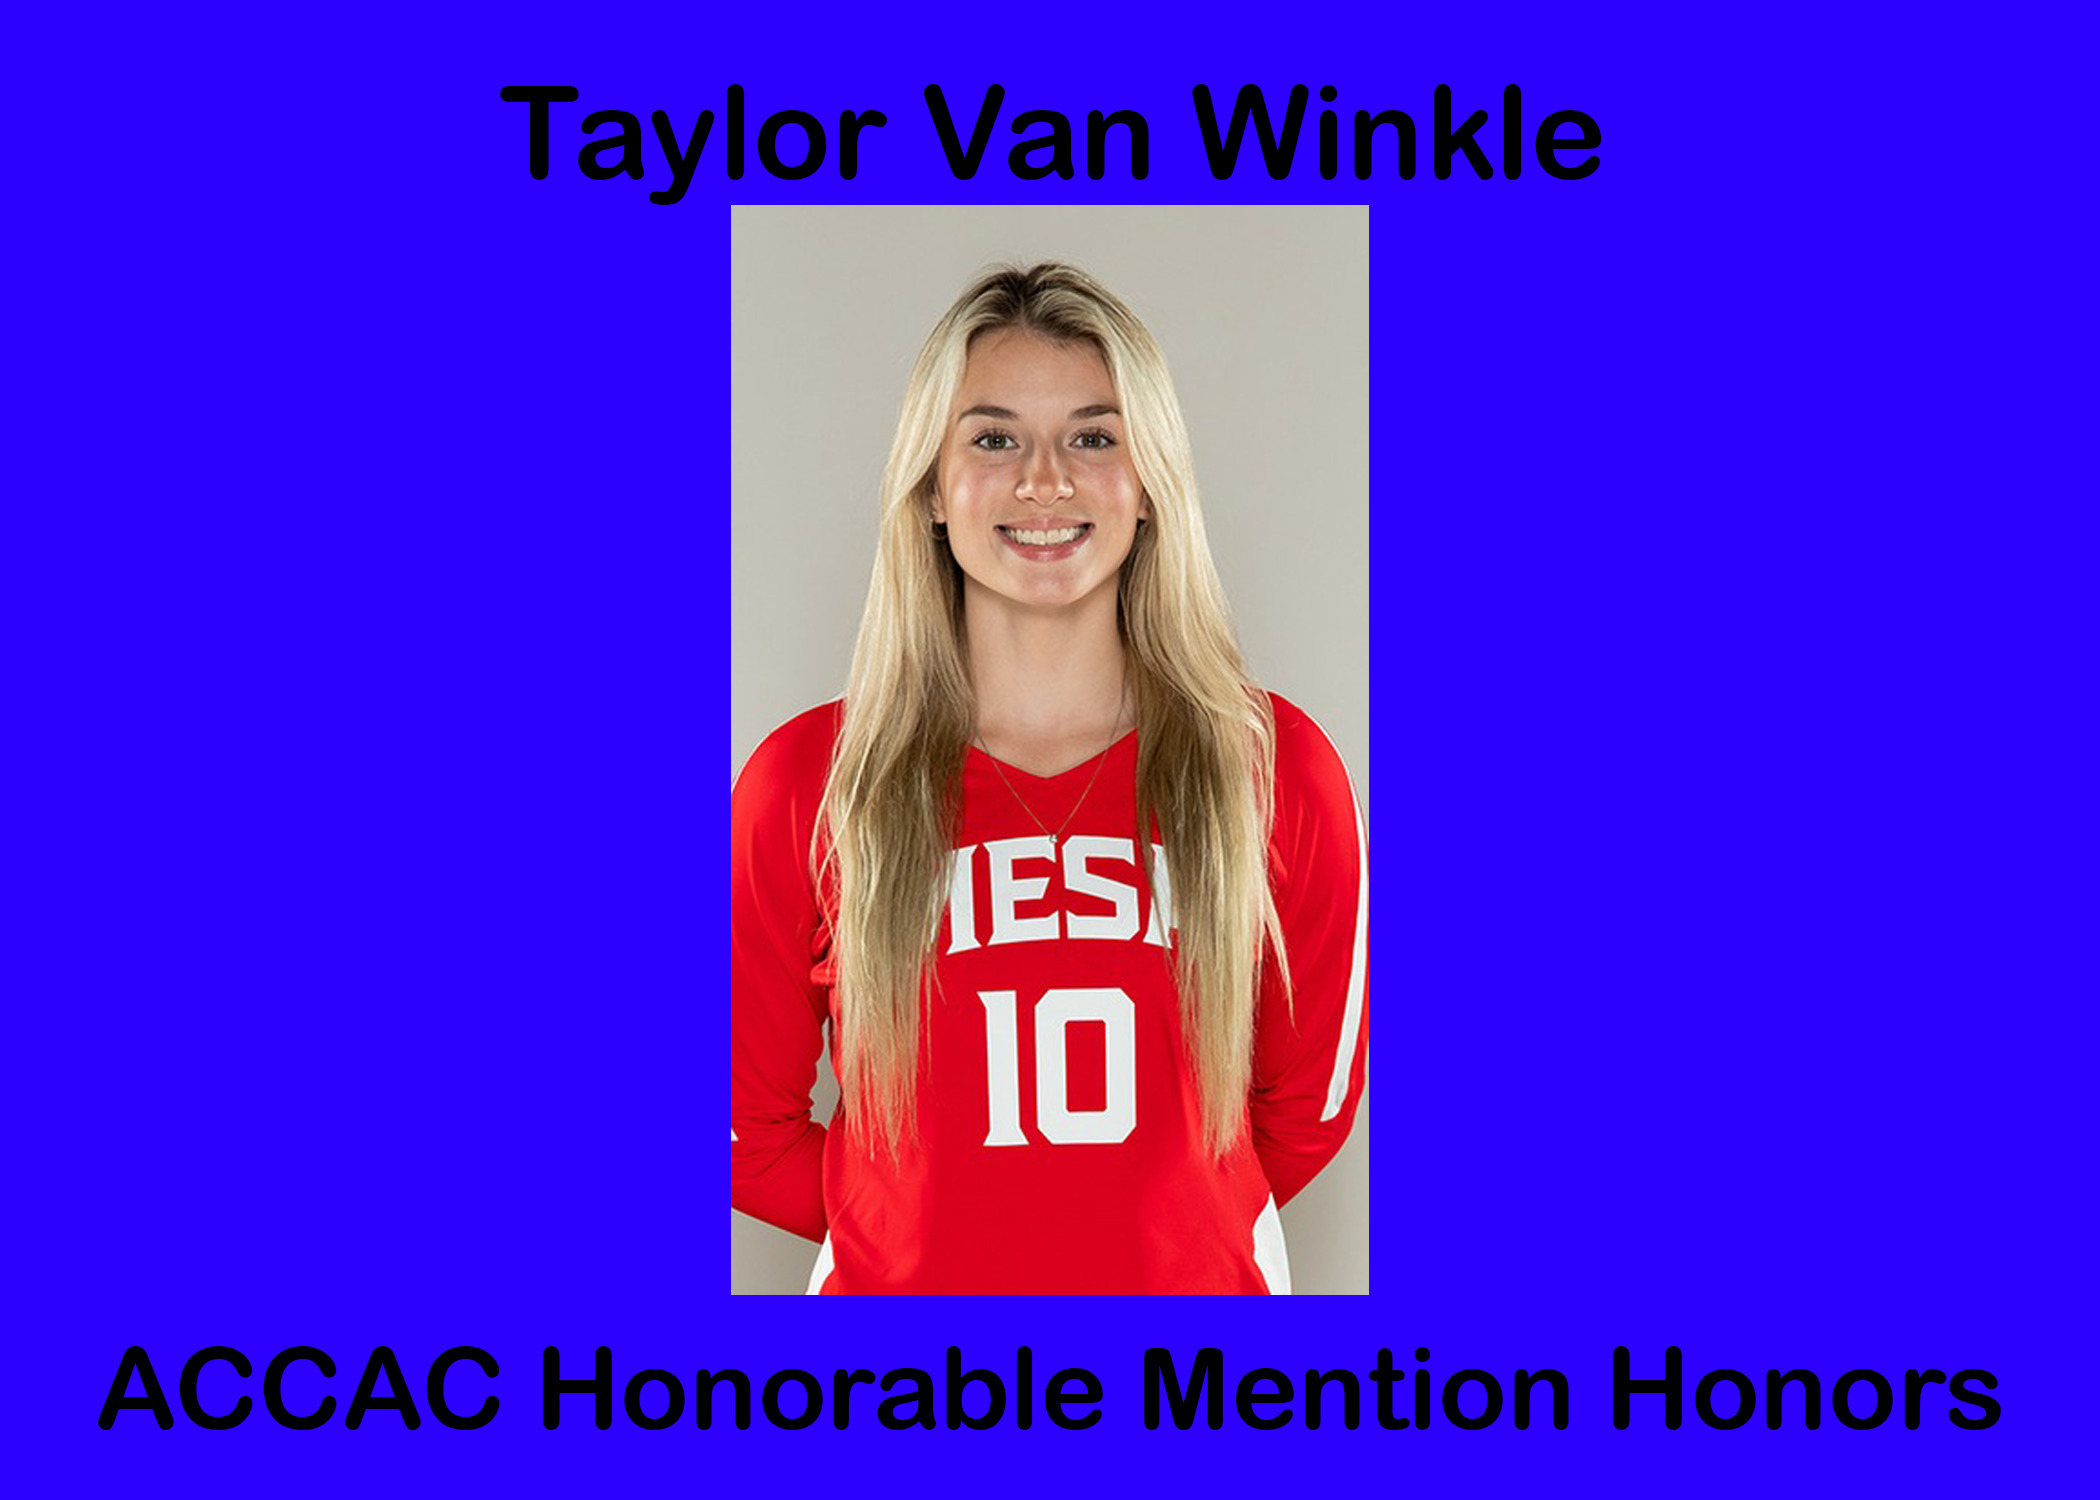 Taylor Van Winkle earns ACCAC Honorable Mention Honors